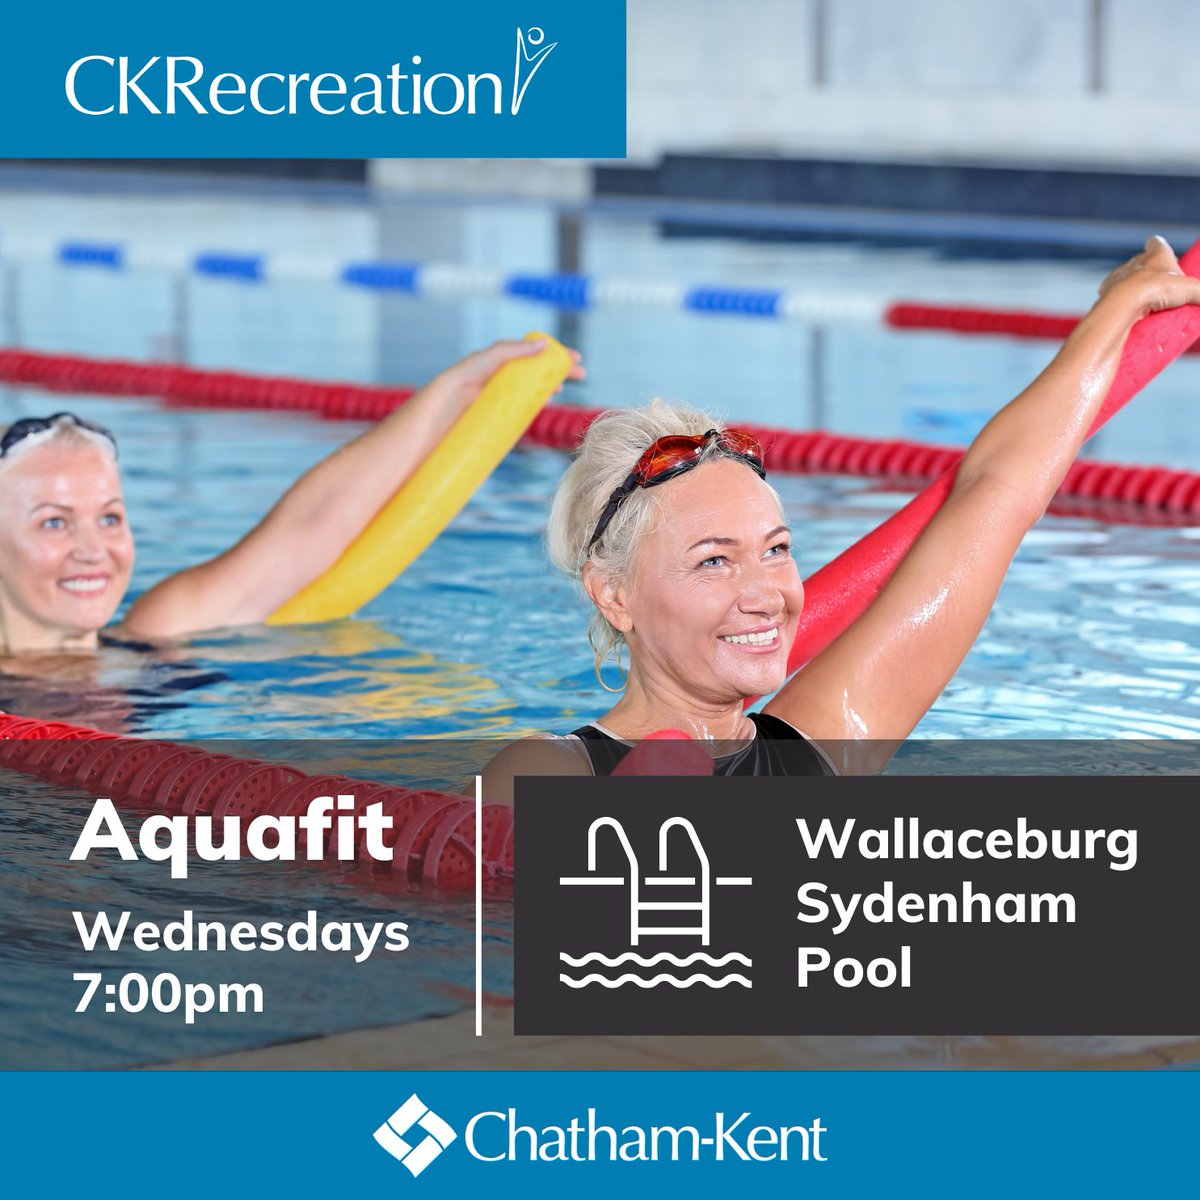 Did you know that @CKRec runs an Aquafit class every Wednesday in Wallaceburg? Dive into their Wednesday Aquafit drop-in classes and let the water work wonders for you. Check out ow.ly/7zIA50R7rh3 for more information.
#YourTVCK #CKont #TrulyLocal #CKRec #Aquafit